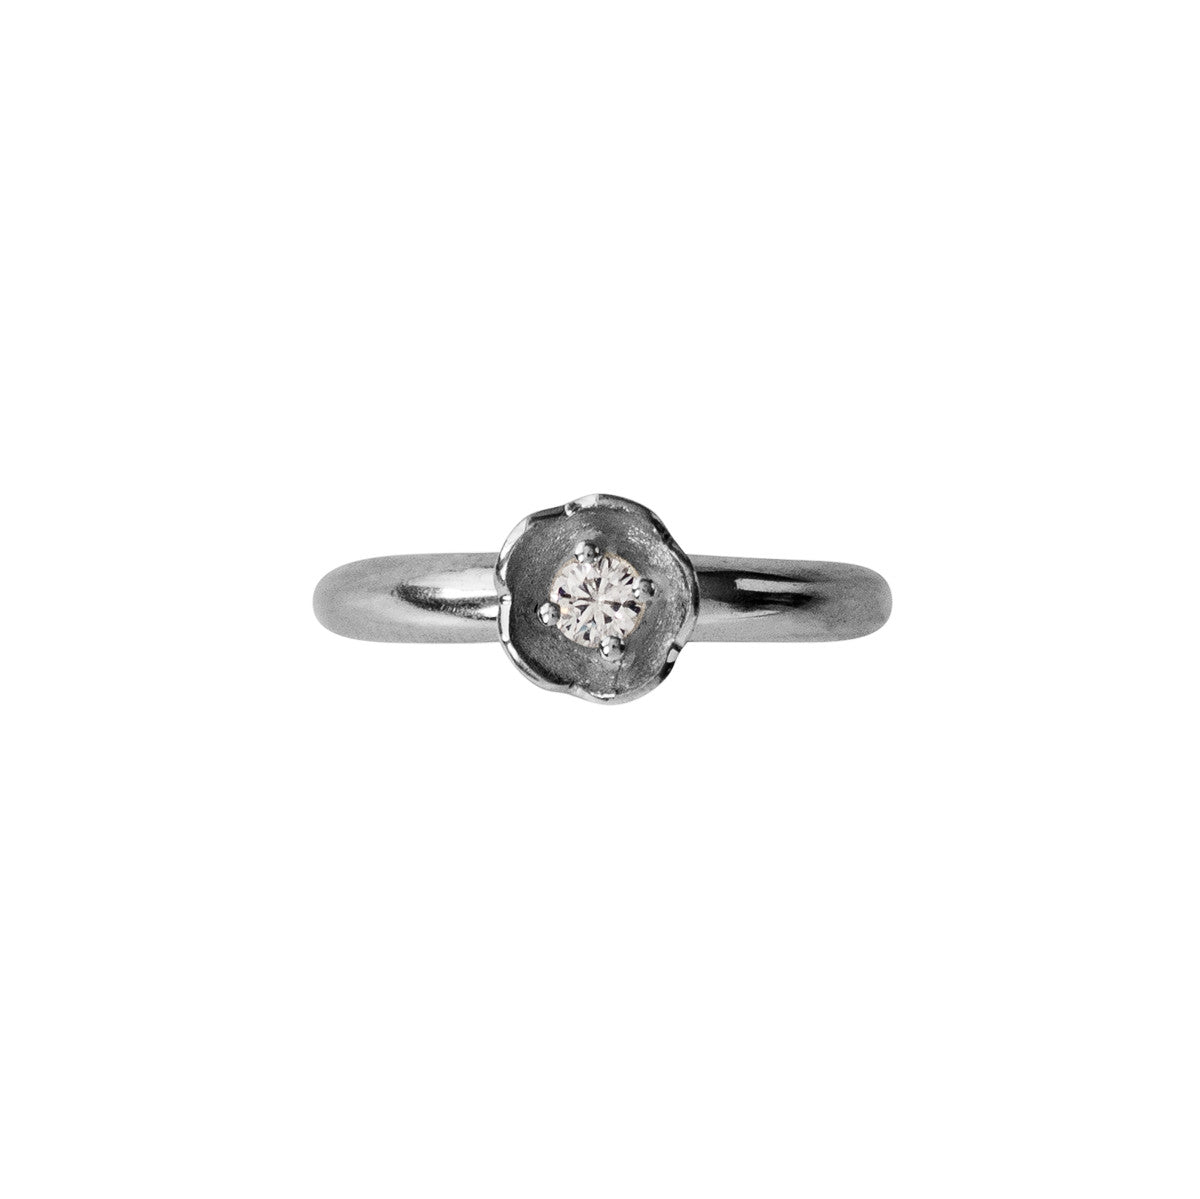 AFRODITE SOLITAIRE GOLD and DIAMOND